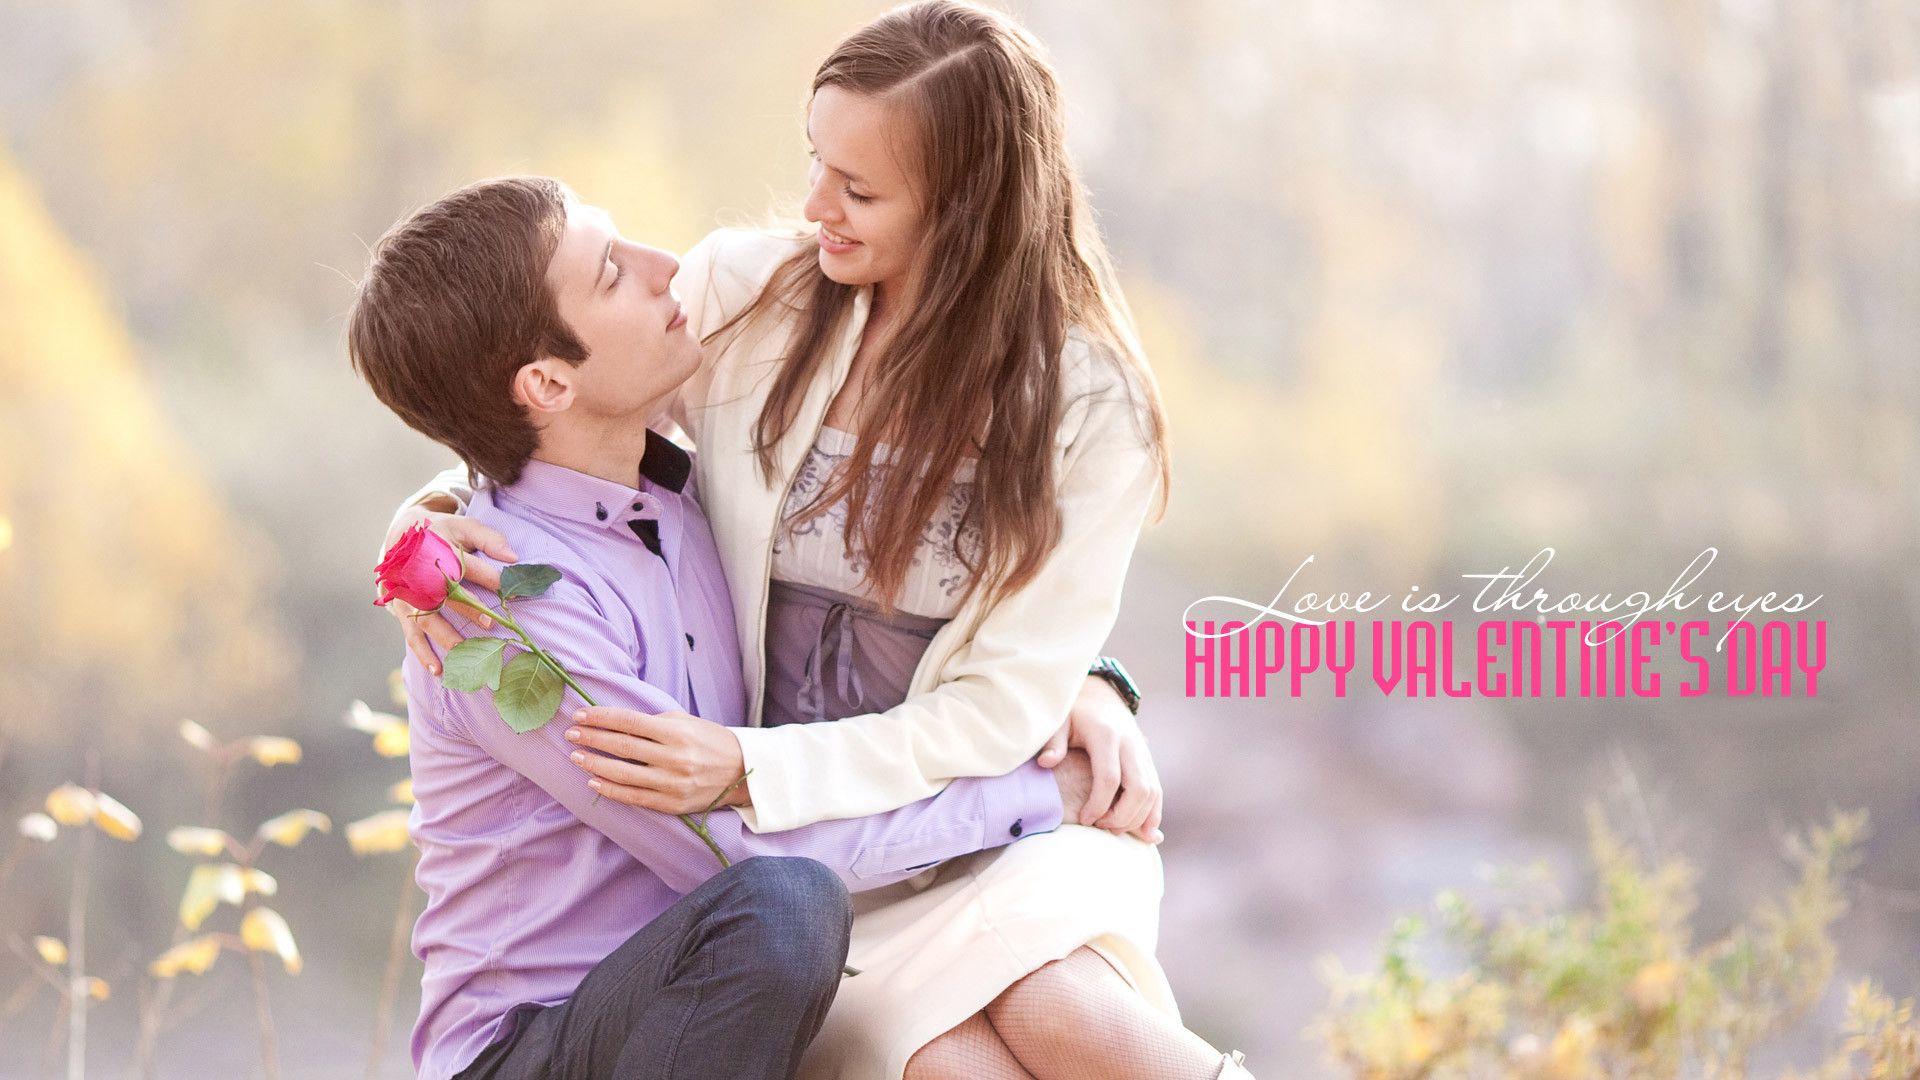 Cute Love Couple Wallpapers   HD Wallpapers Backgrounds of